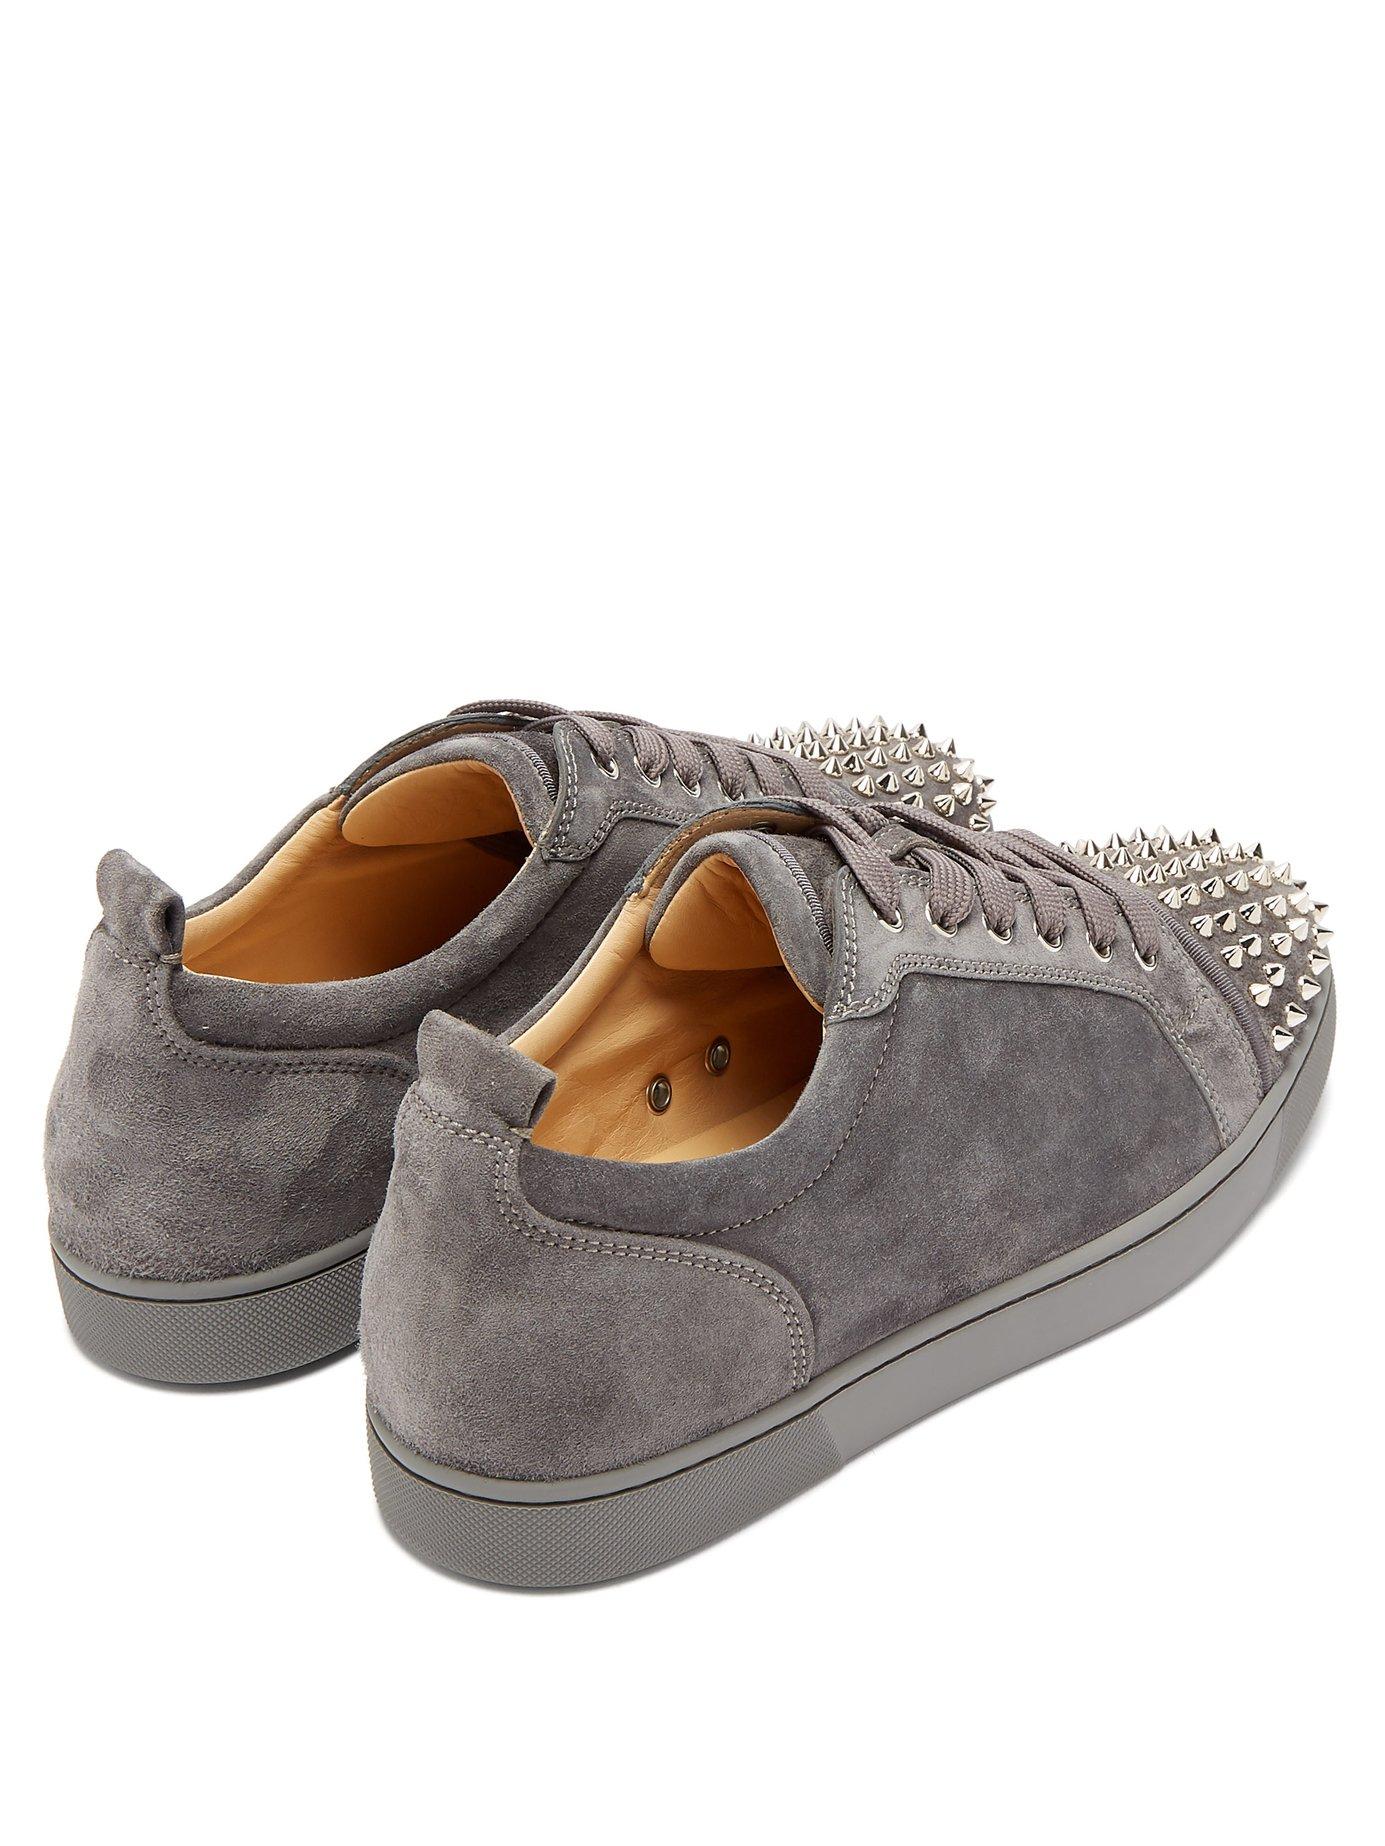 Christian Louboutin Louis Junior Spiked Suede Sneakers in Gray for Men |  Lyst